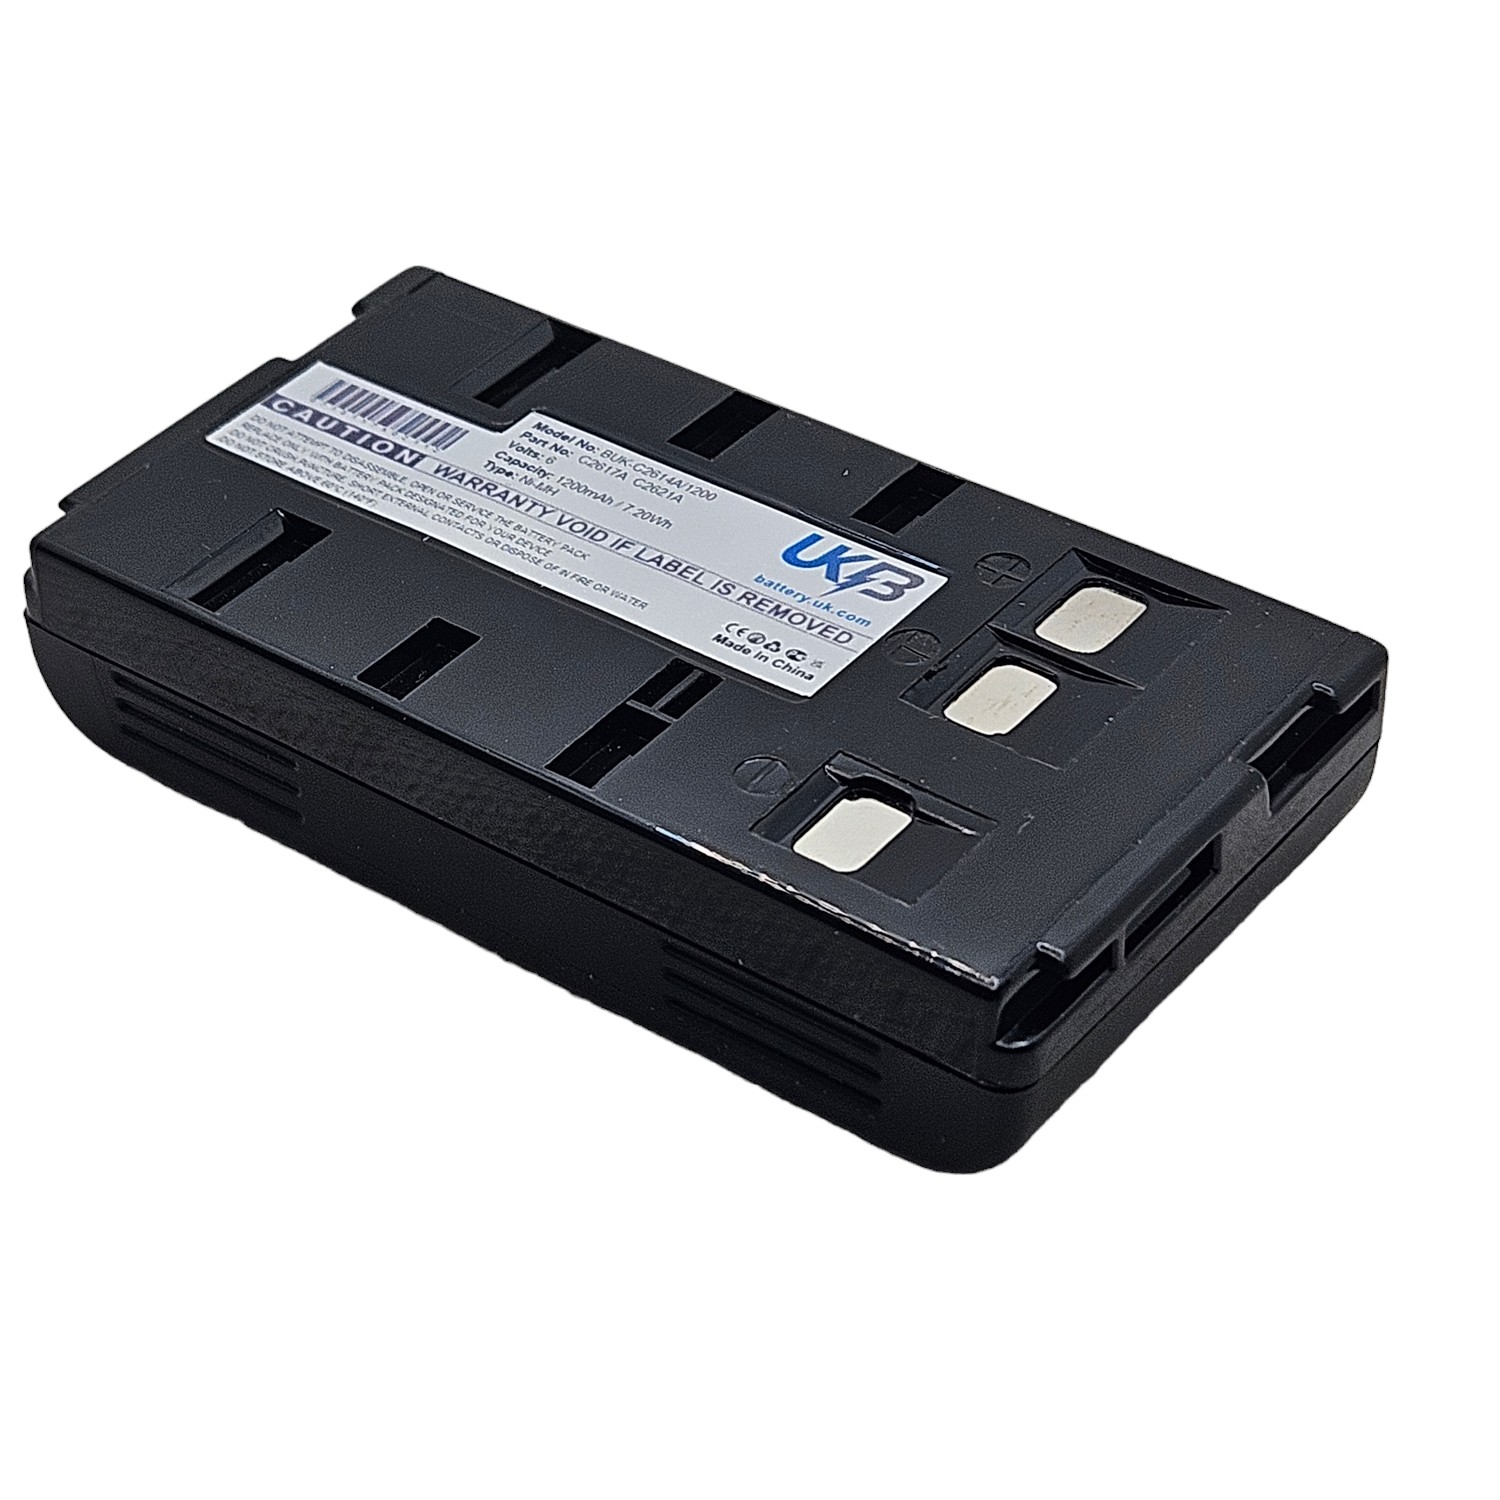 PANASONIC PV S43 Compatible Replacement Battery